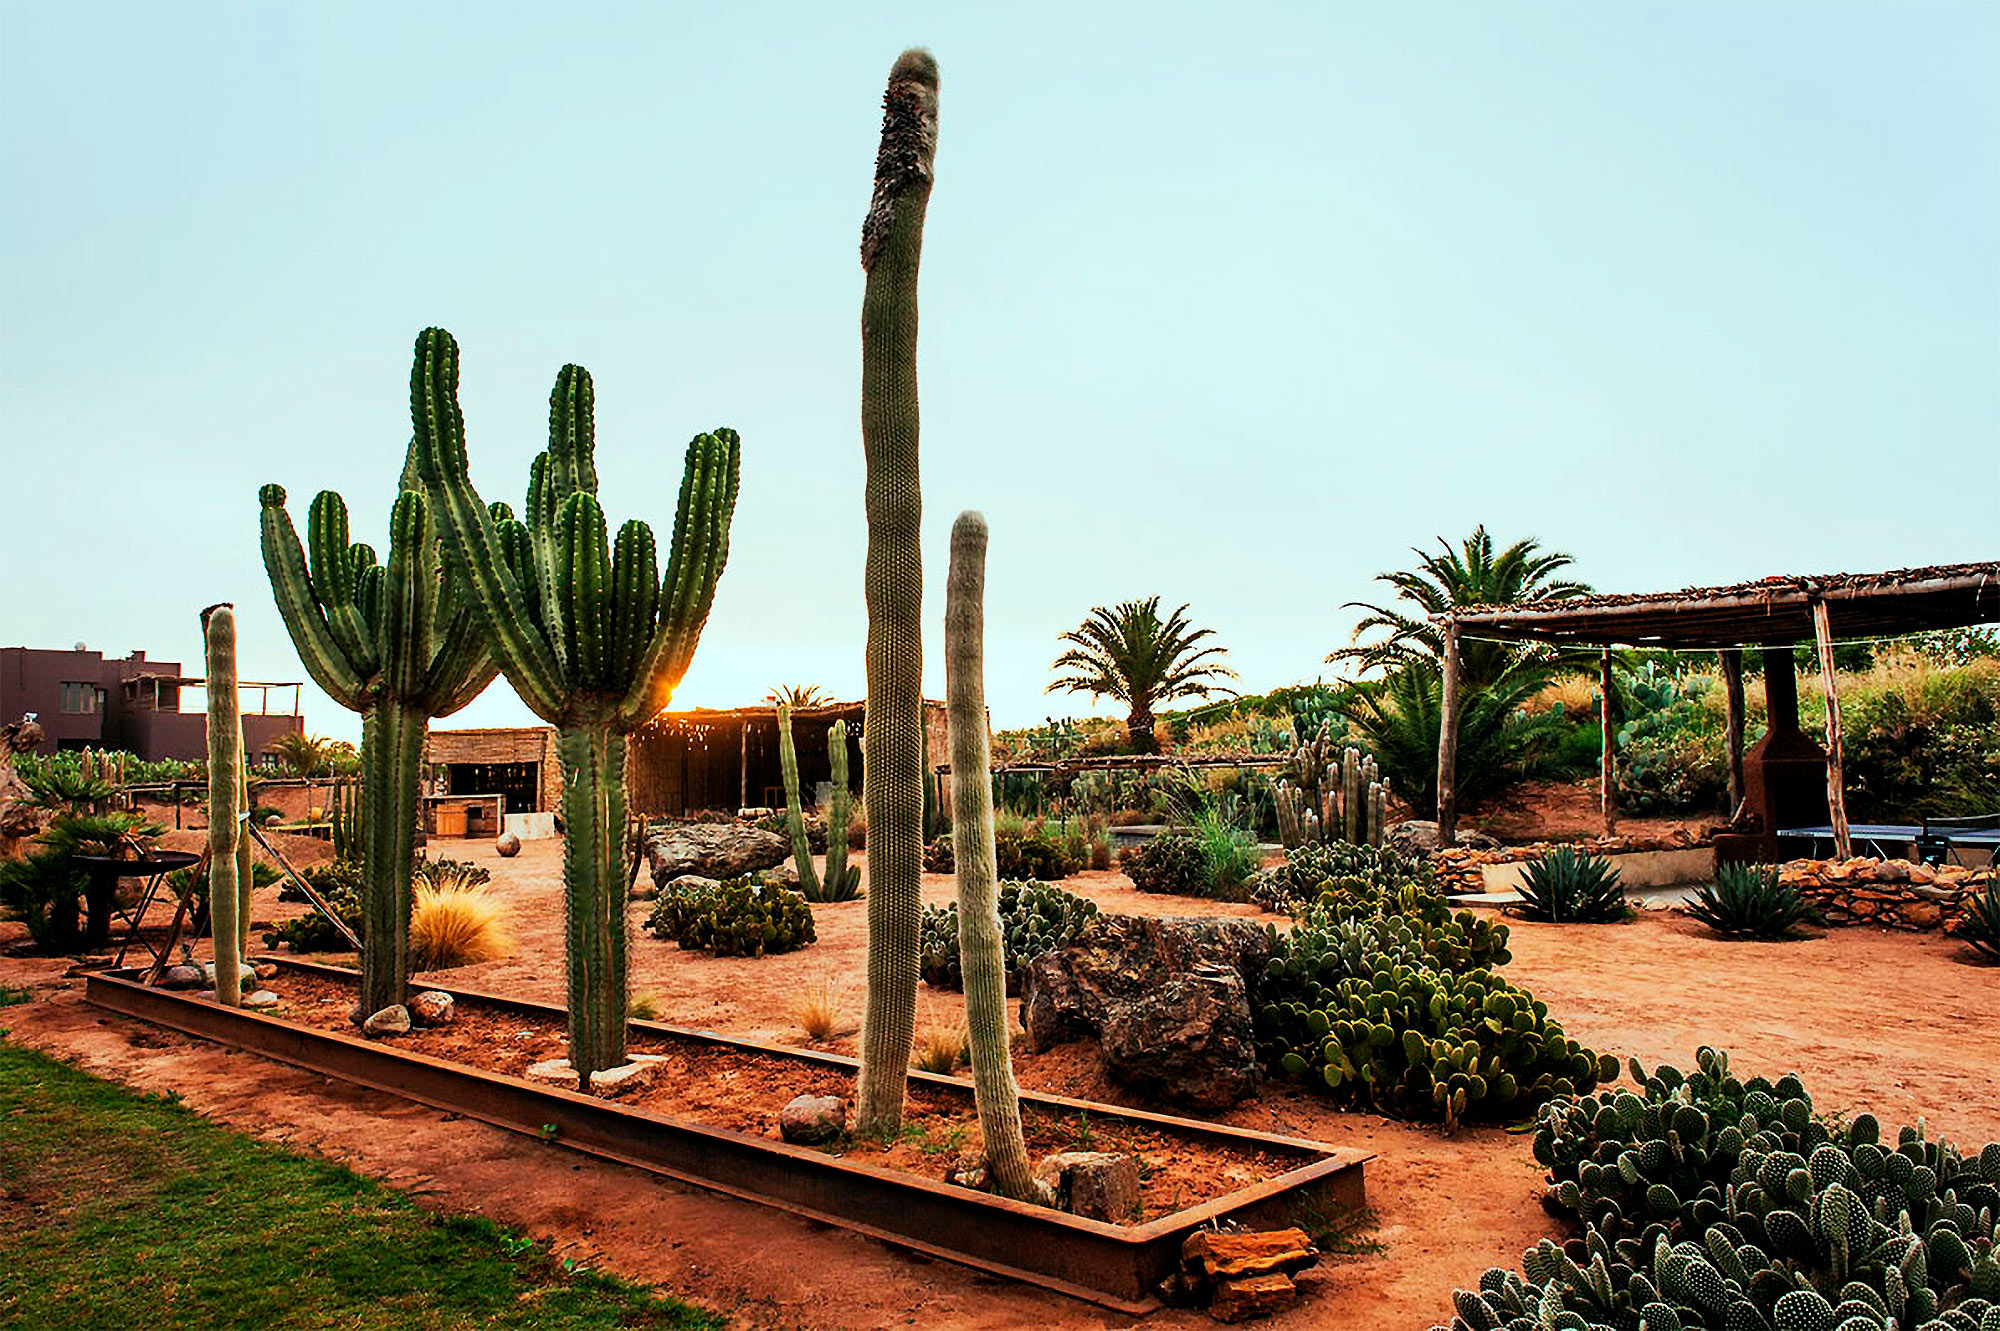 Cacti and oriental plants in a garden, sand on the ground